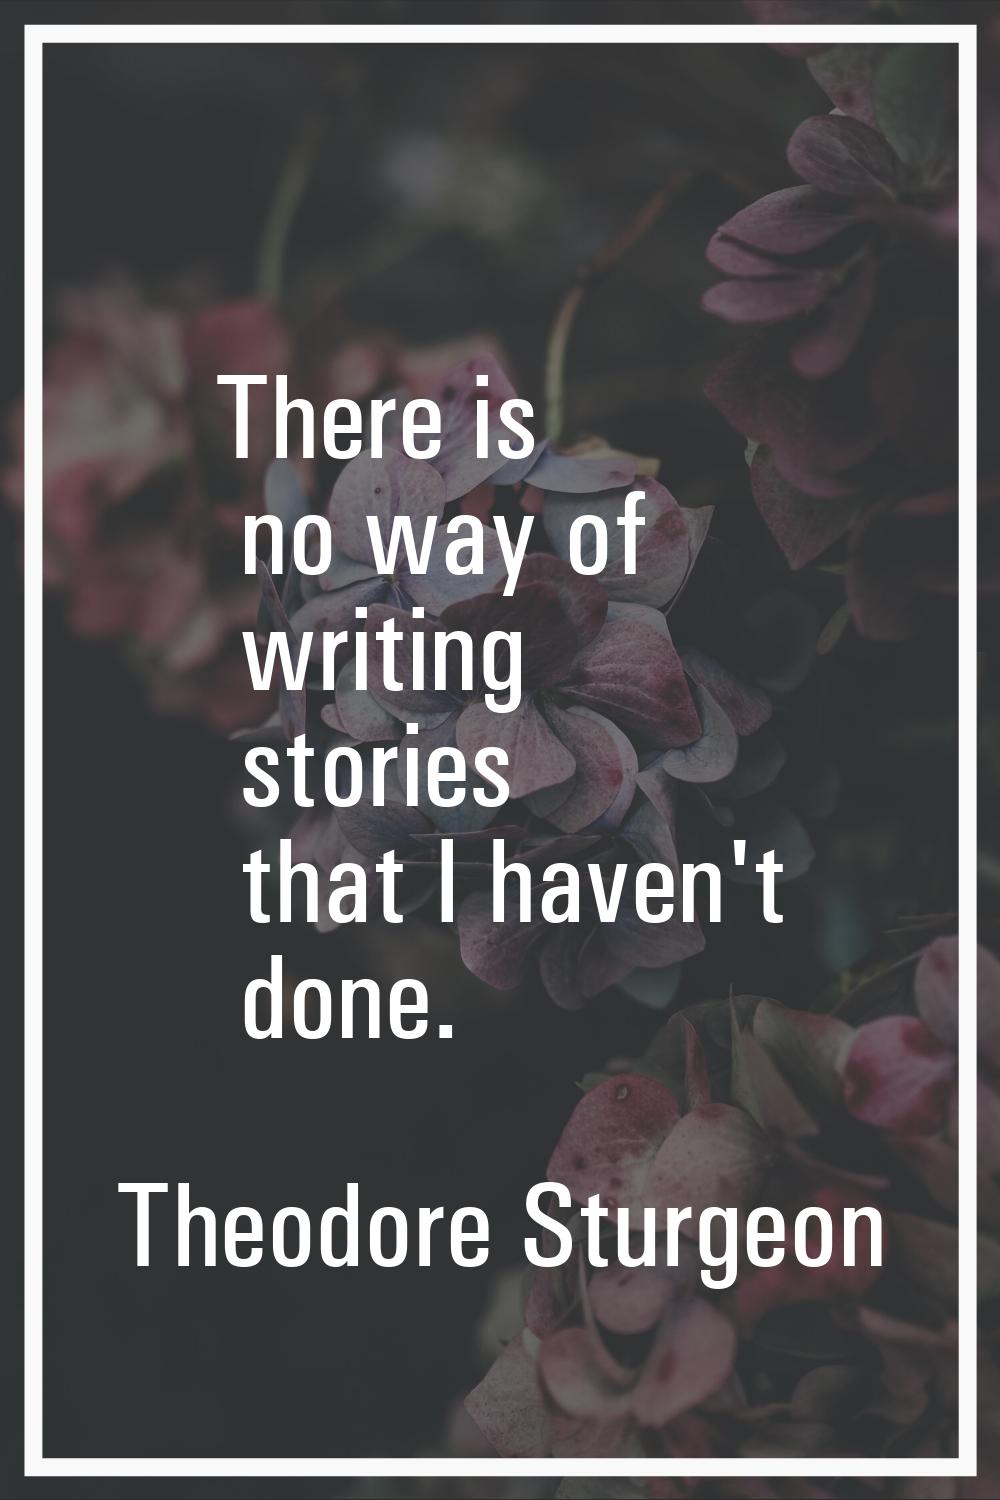 There is no way of writing stories that I haven't done.